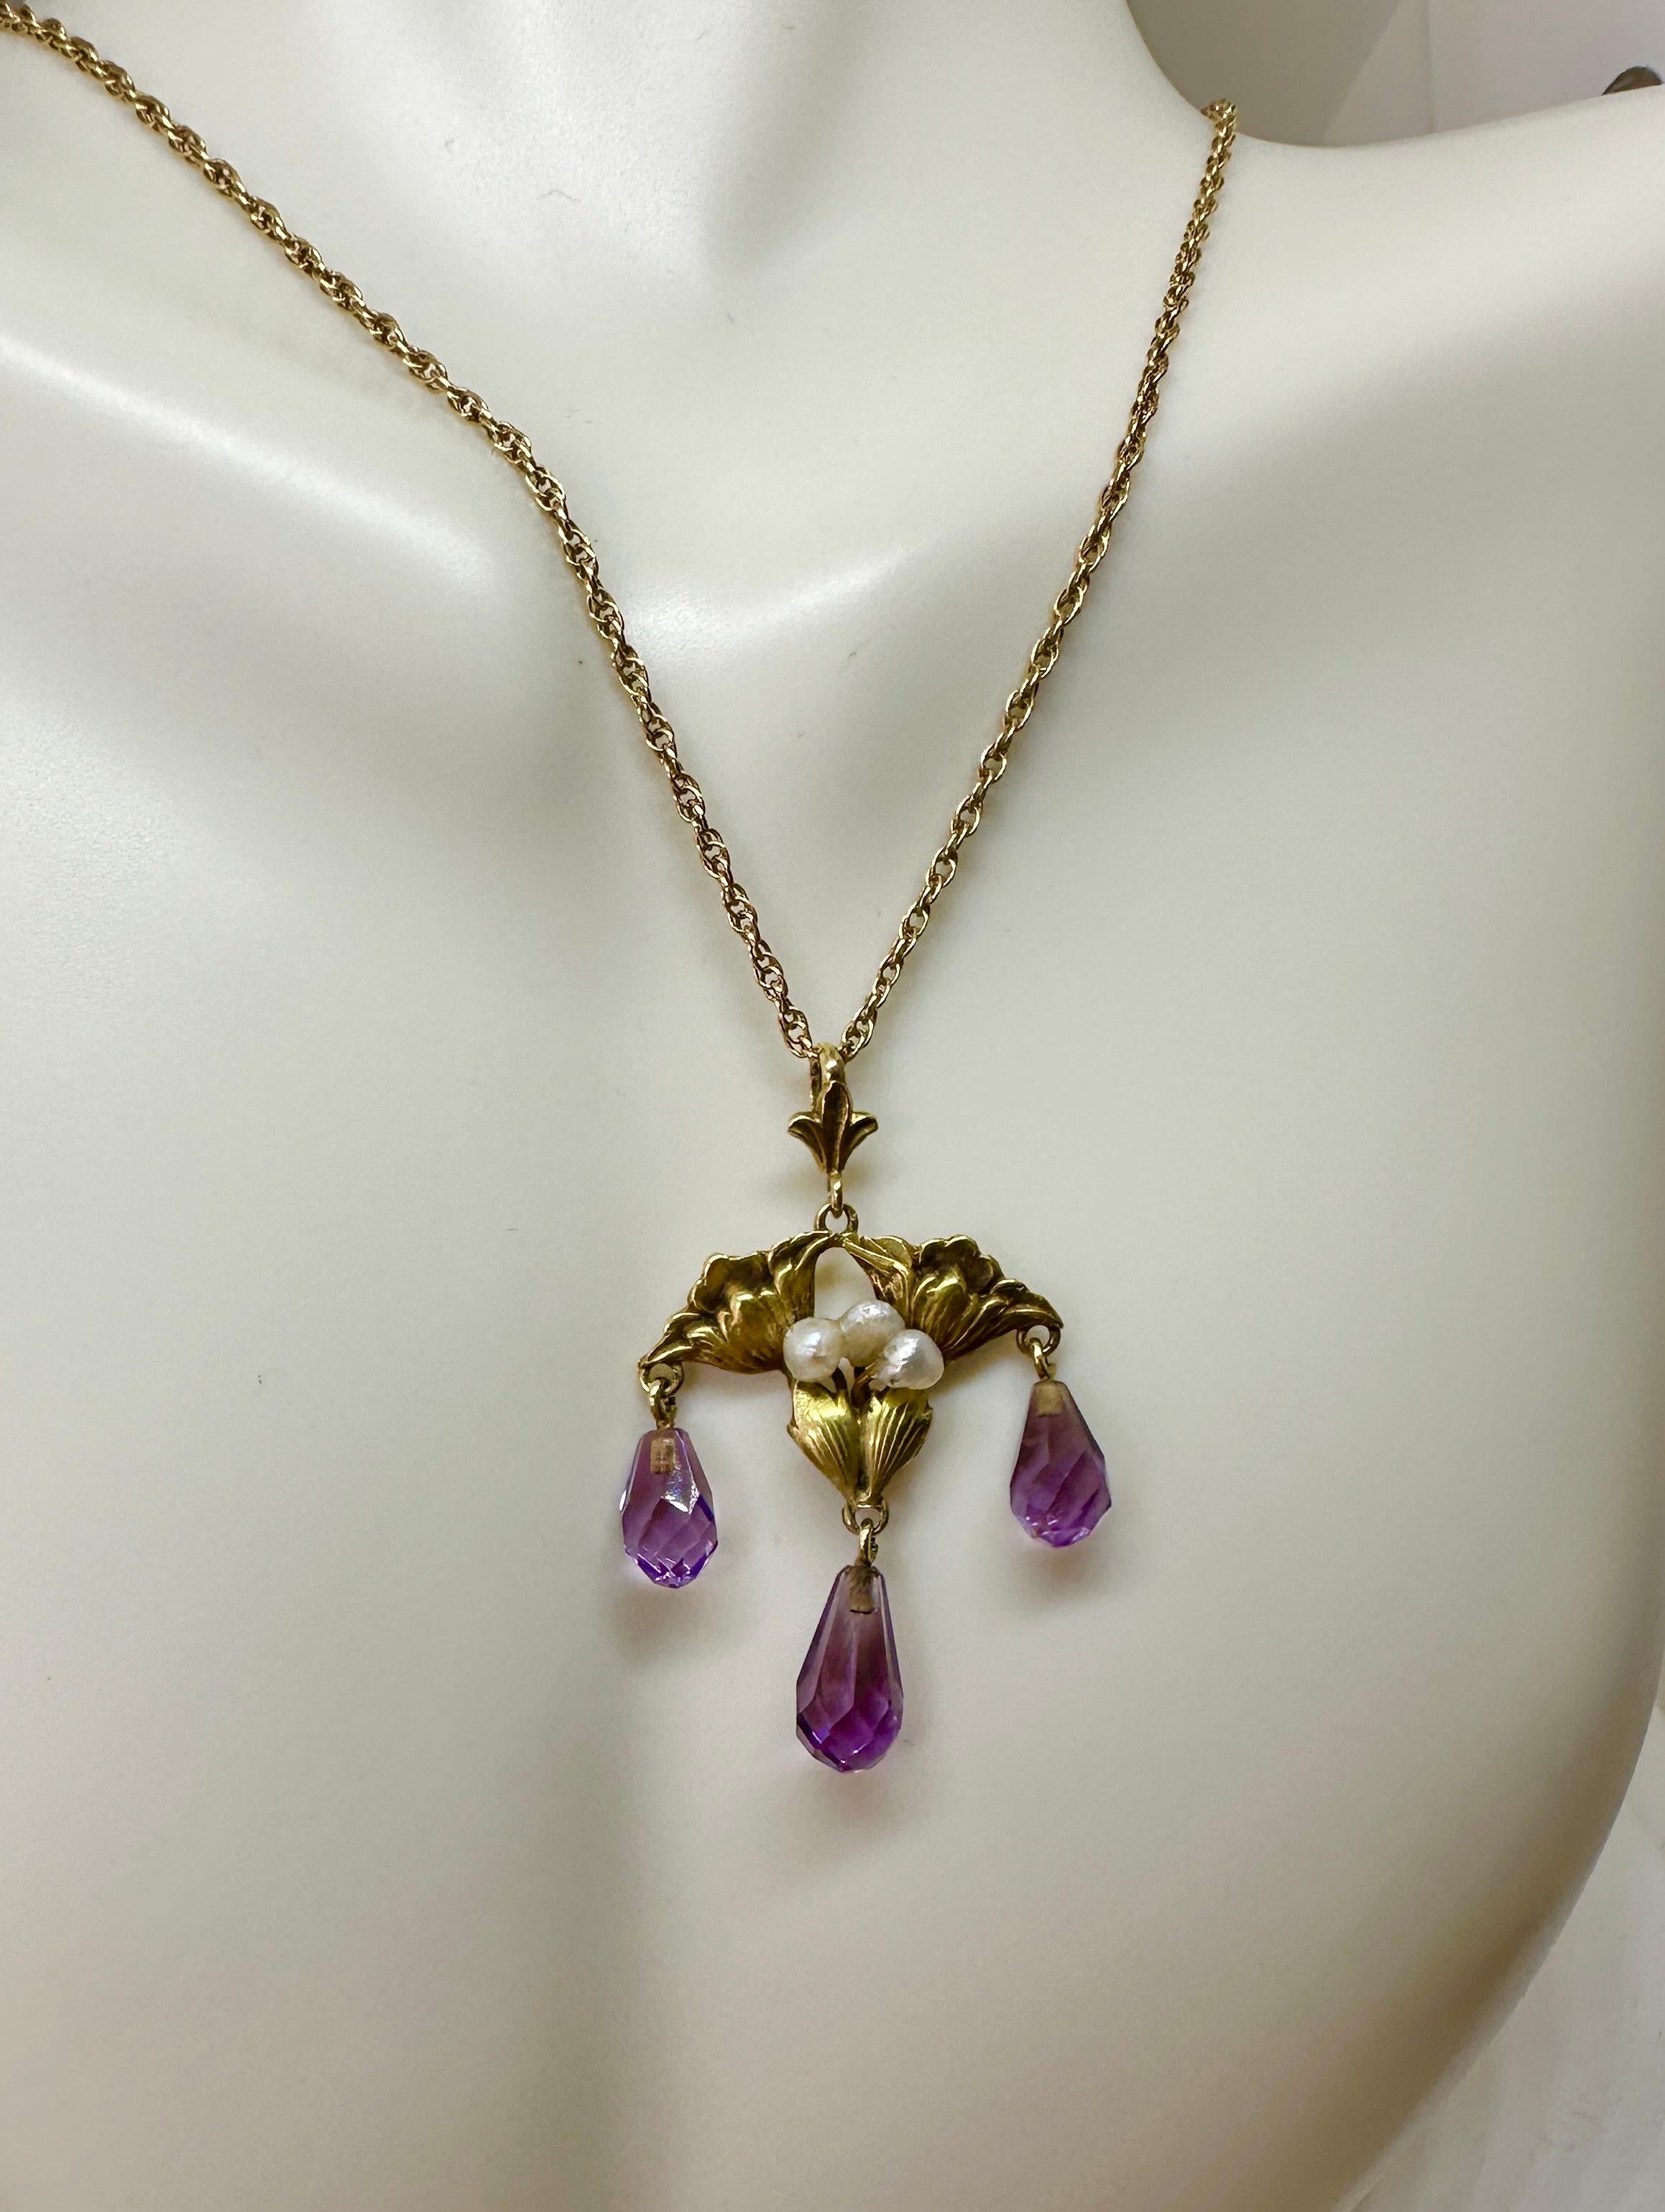 THIS IS A STUNNING ANTIQUE AMETHYST ART NOUVEAU FLOWER MOTIF PENDANT IN 14 KARAT GREEN GOLD WITH THREE BRIOLETTE CUT AMETHYST DROPS.
The exquisite necklace has three briolette faceted natural amethyst drops hanging from a lotus or poppy flower motif